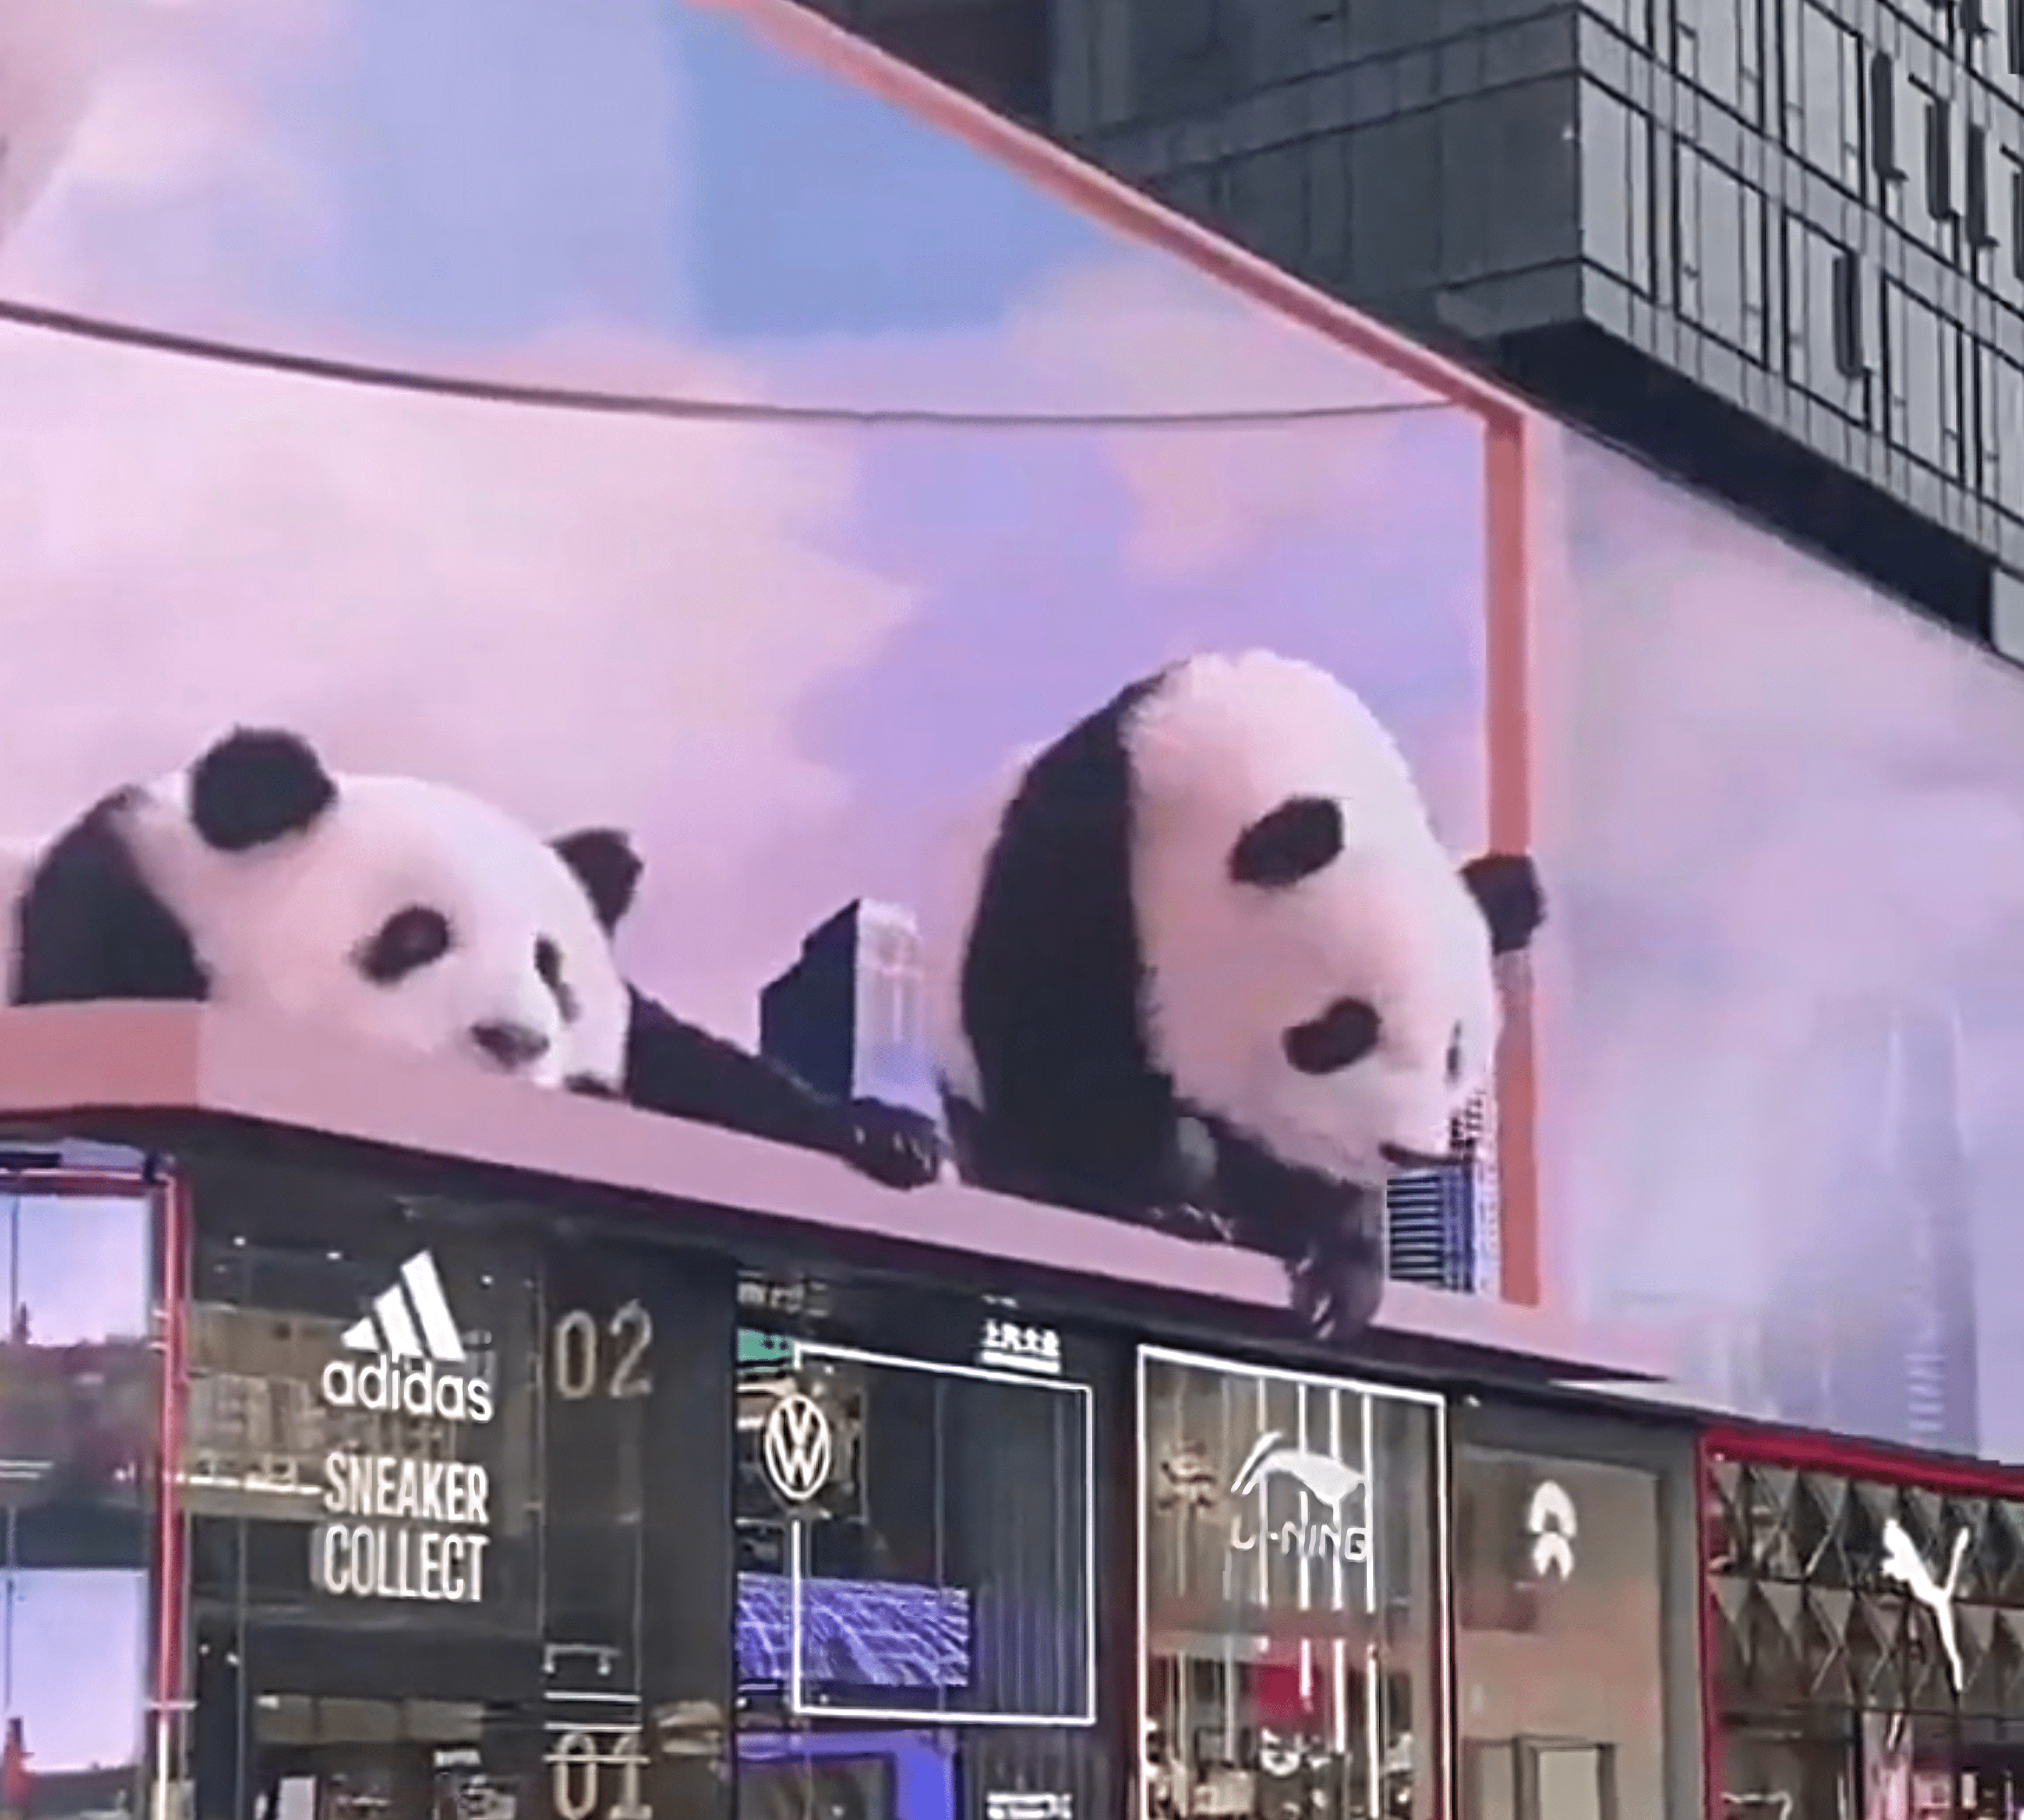 3D LED billboards with pandas